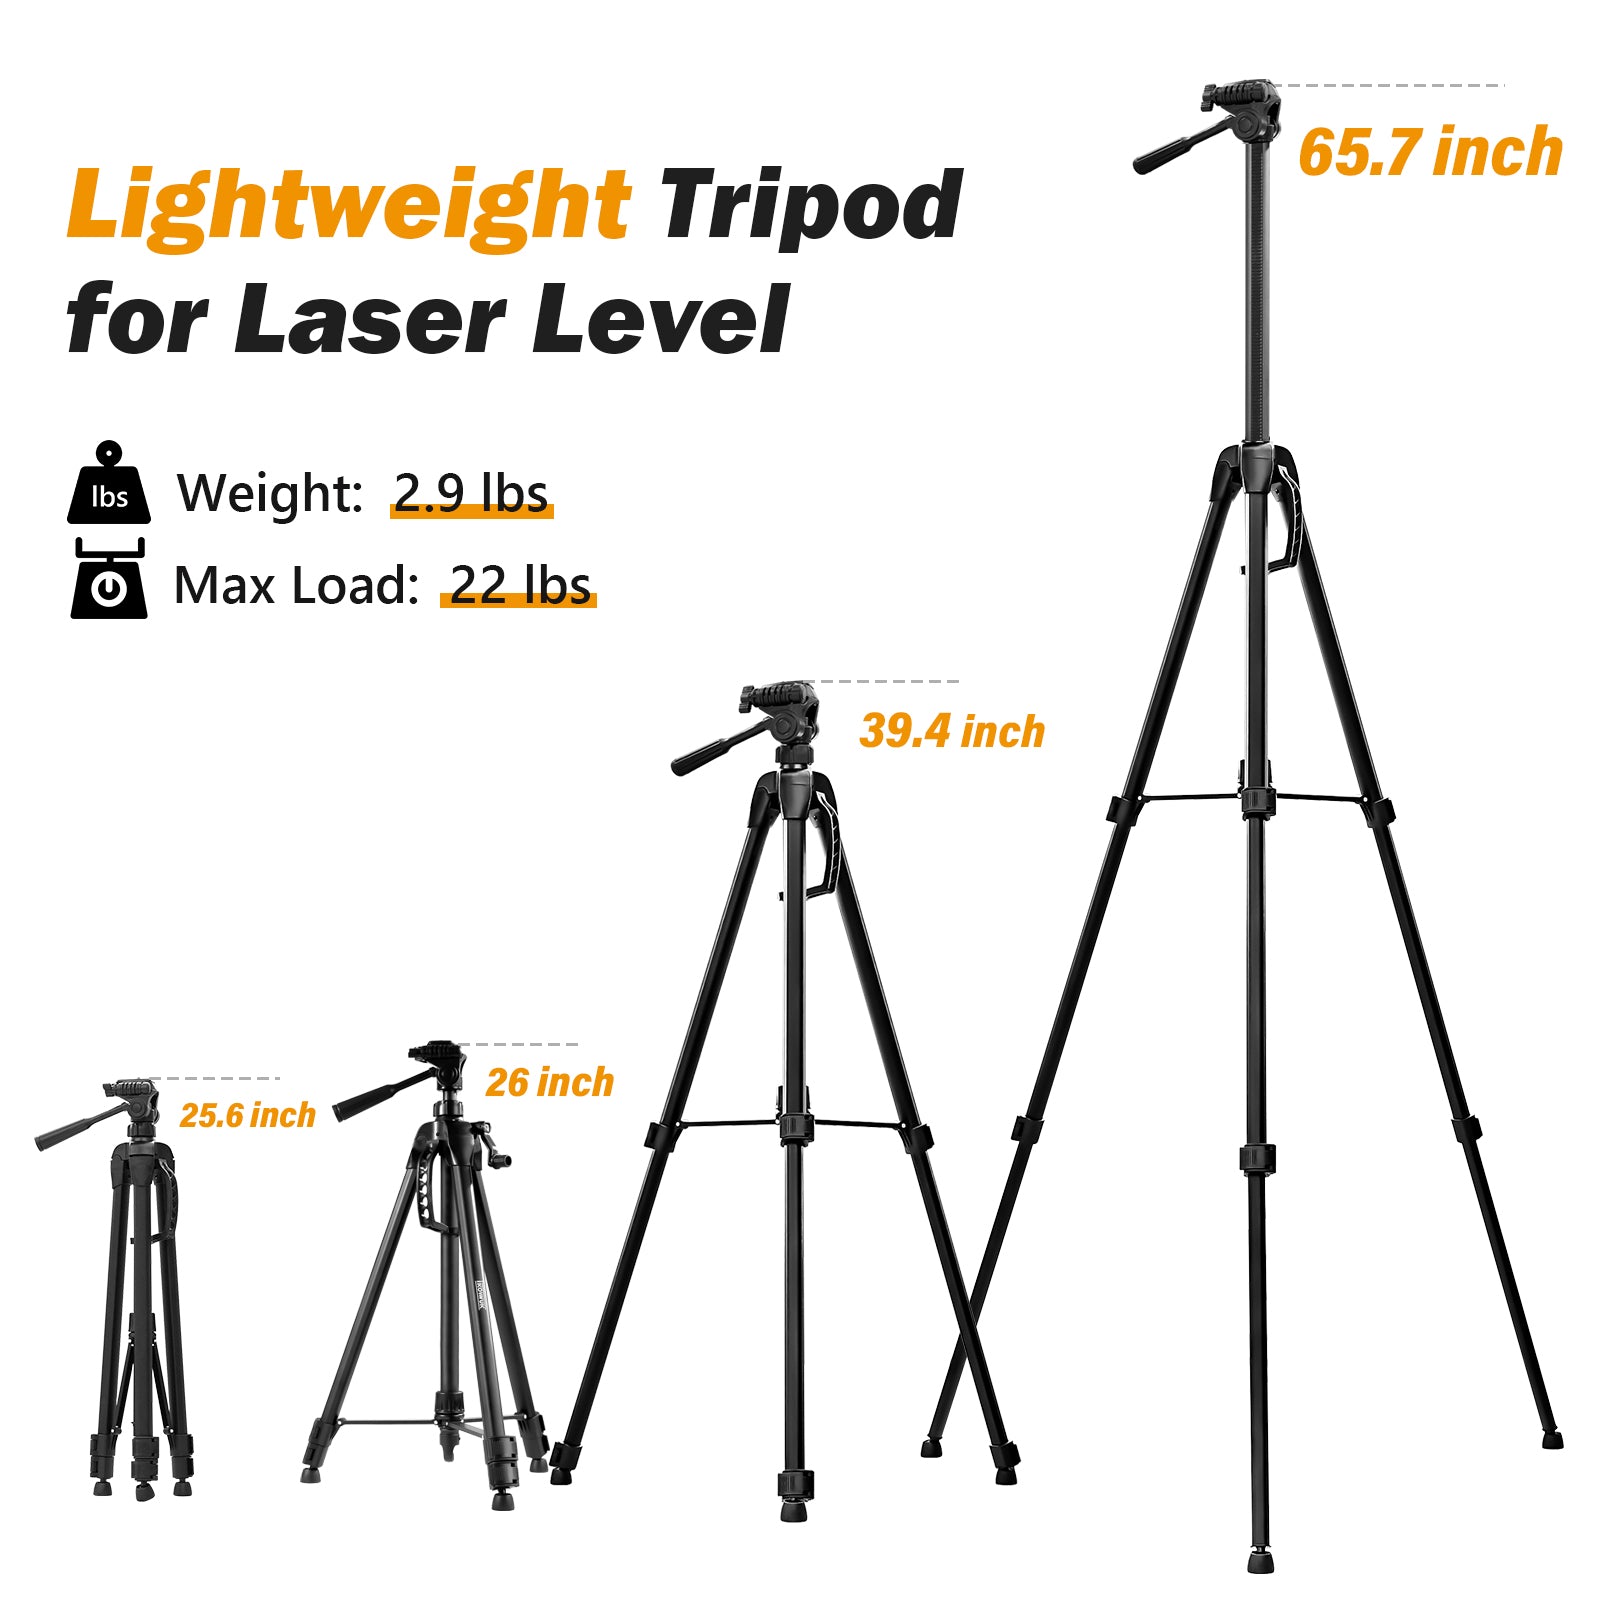 IKOVWUK 3160 Compact Tripod Tool for Laser Level, Tripod with Adjustable Height 26—65.7 Inches for Use with Point Lasers, and Laser Distance Tape Measuring Other